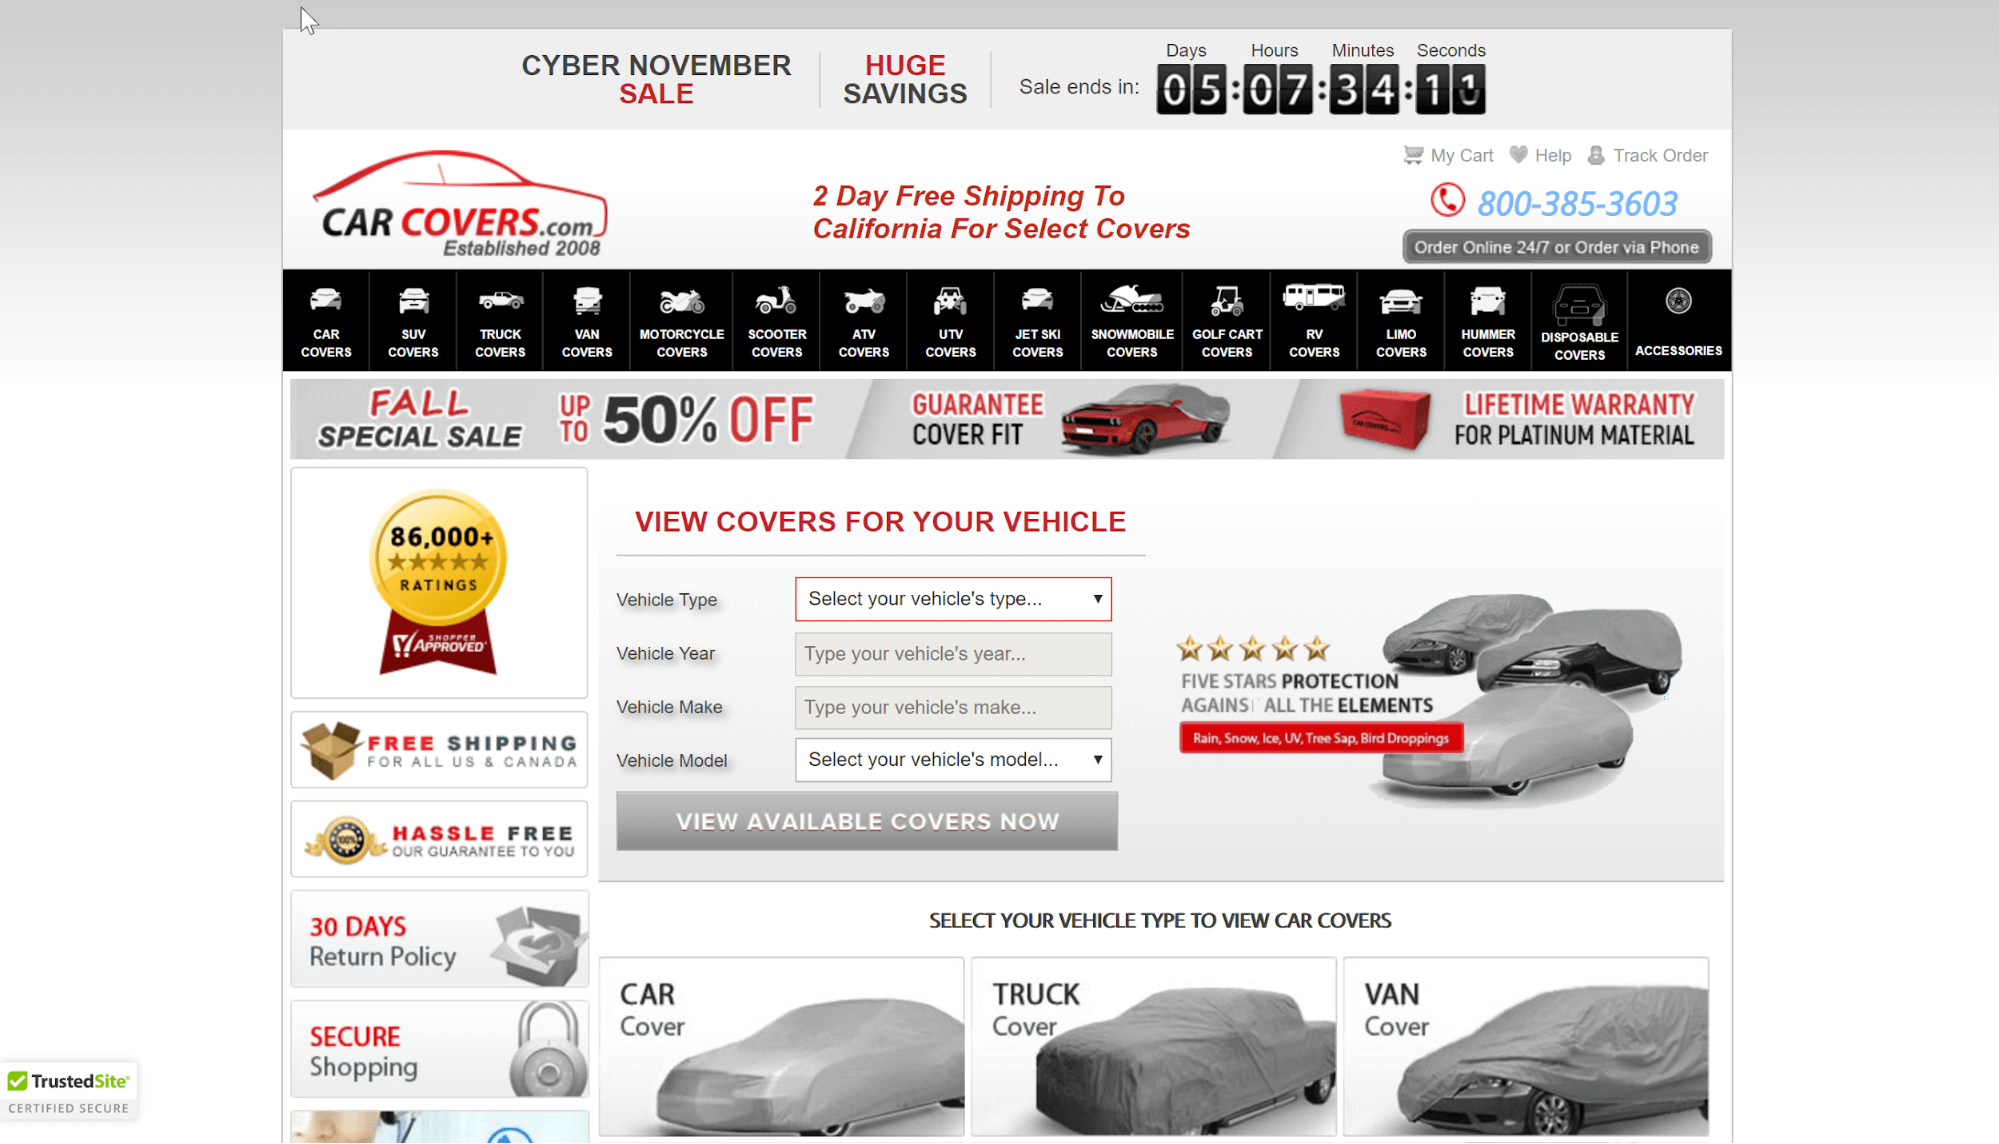 Carcovers.com homepage screenshot with a TrustedSite security badge in the bottom left corner. 